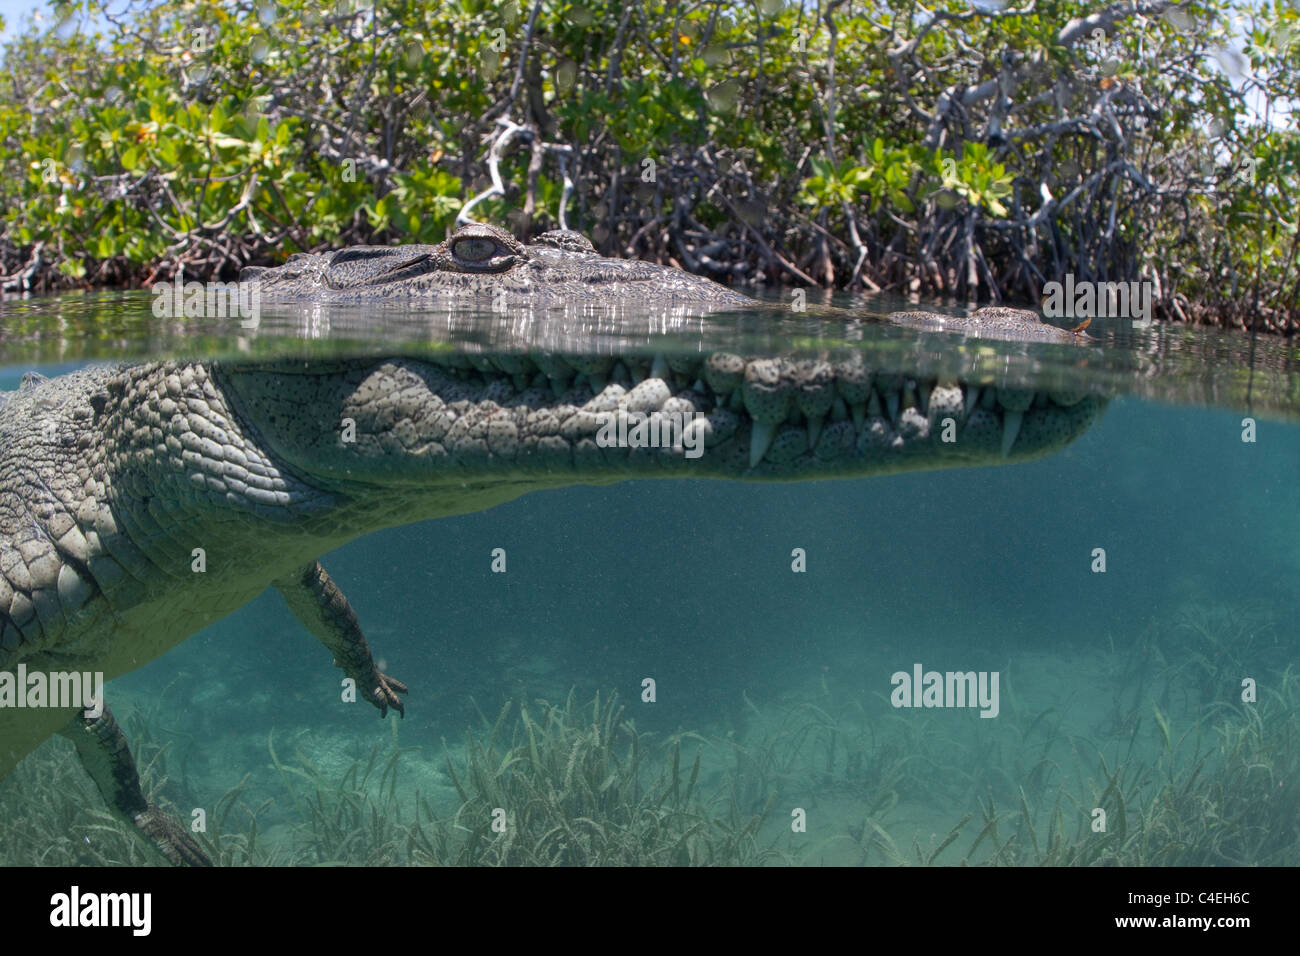 A split-water view of a Cuban Crocodile swimming through a mangrove forest off the coast of Cuba. Stock Photo